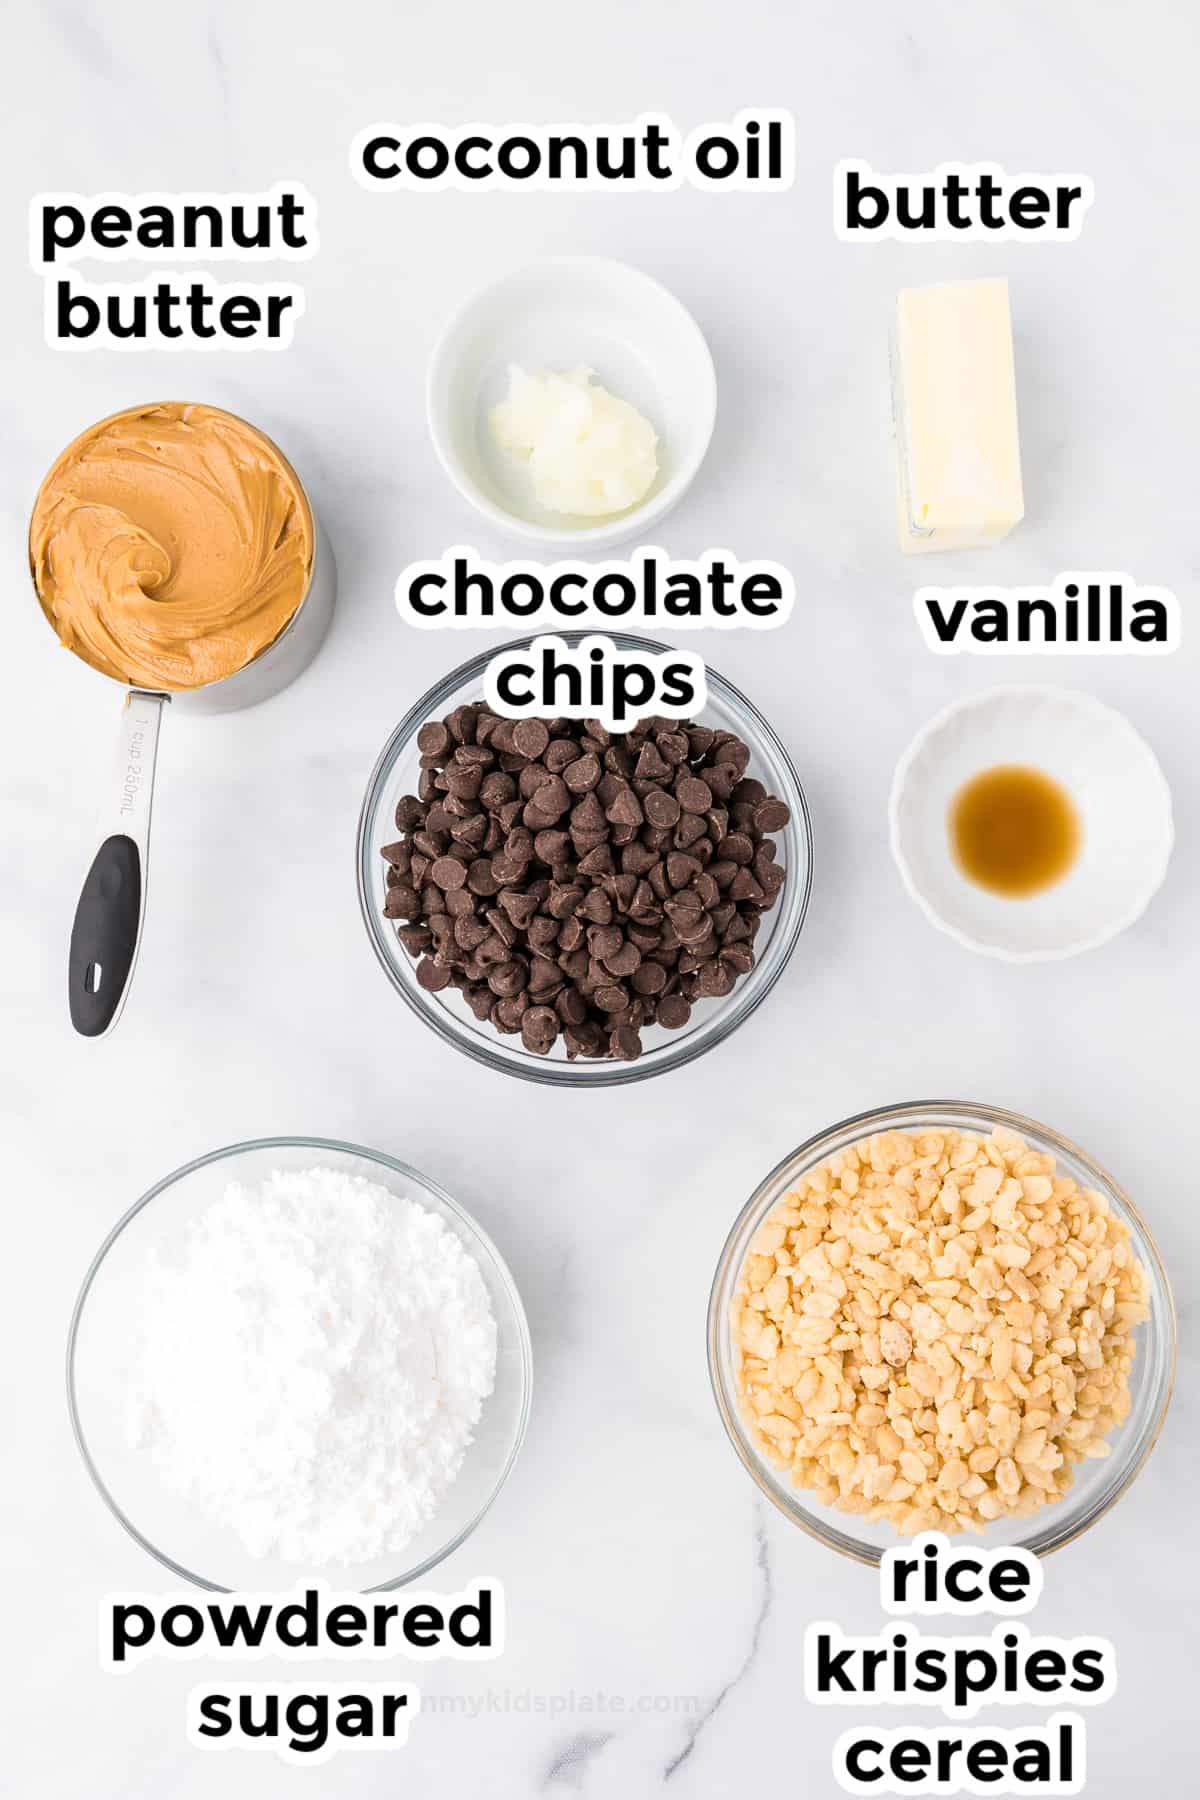 Ingredients for peanut butter balls with rice kripies cereal in bowls on a counter from overhead with text labels.